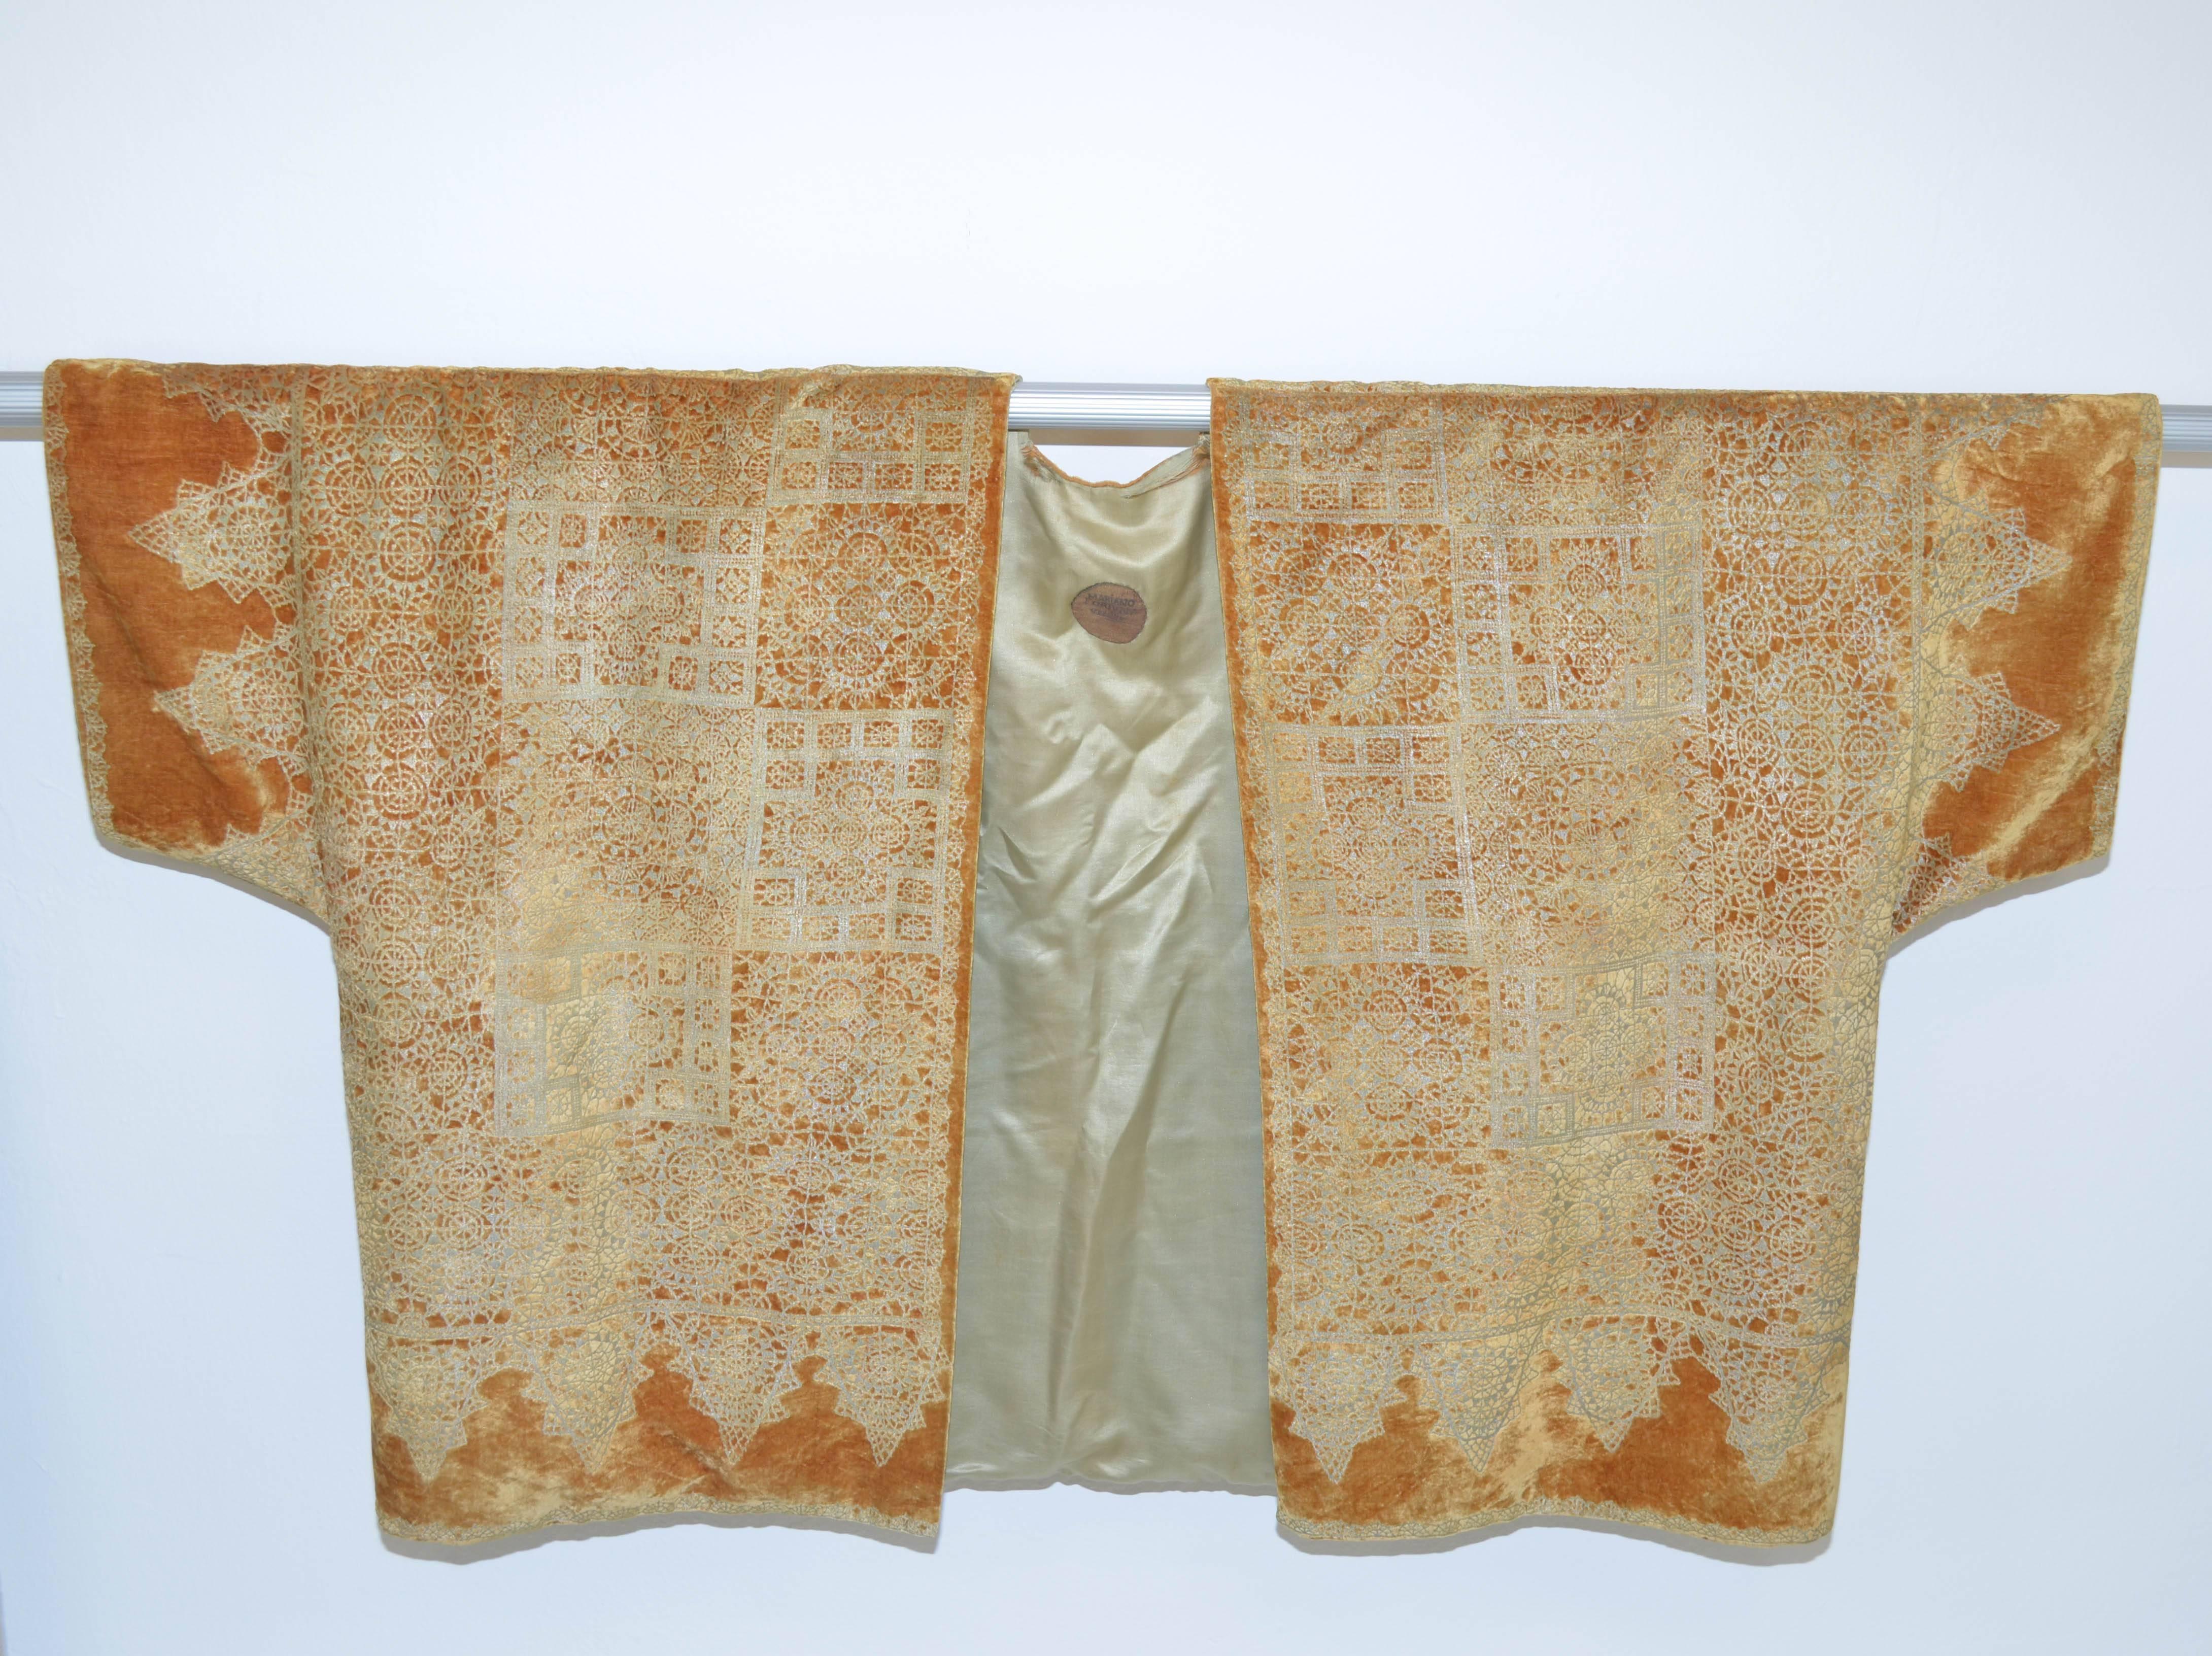 Brown Mariano Fortuny 1920's Stenciled Velvet Evening Jacket